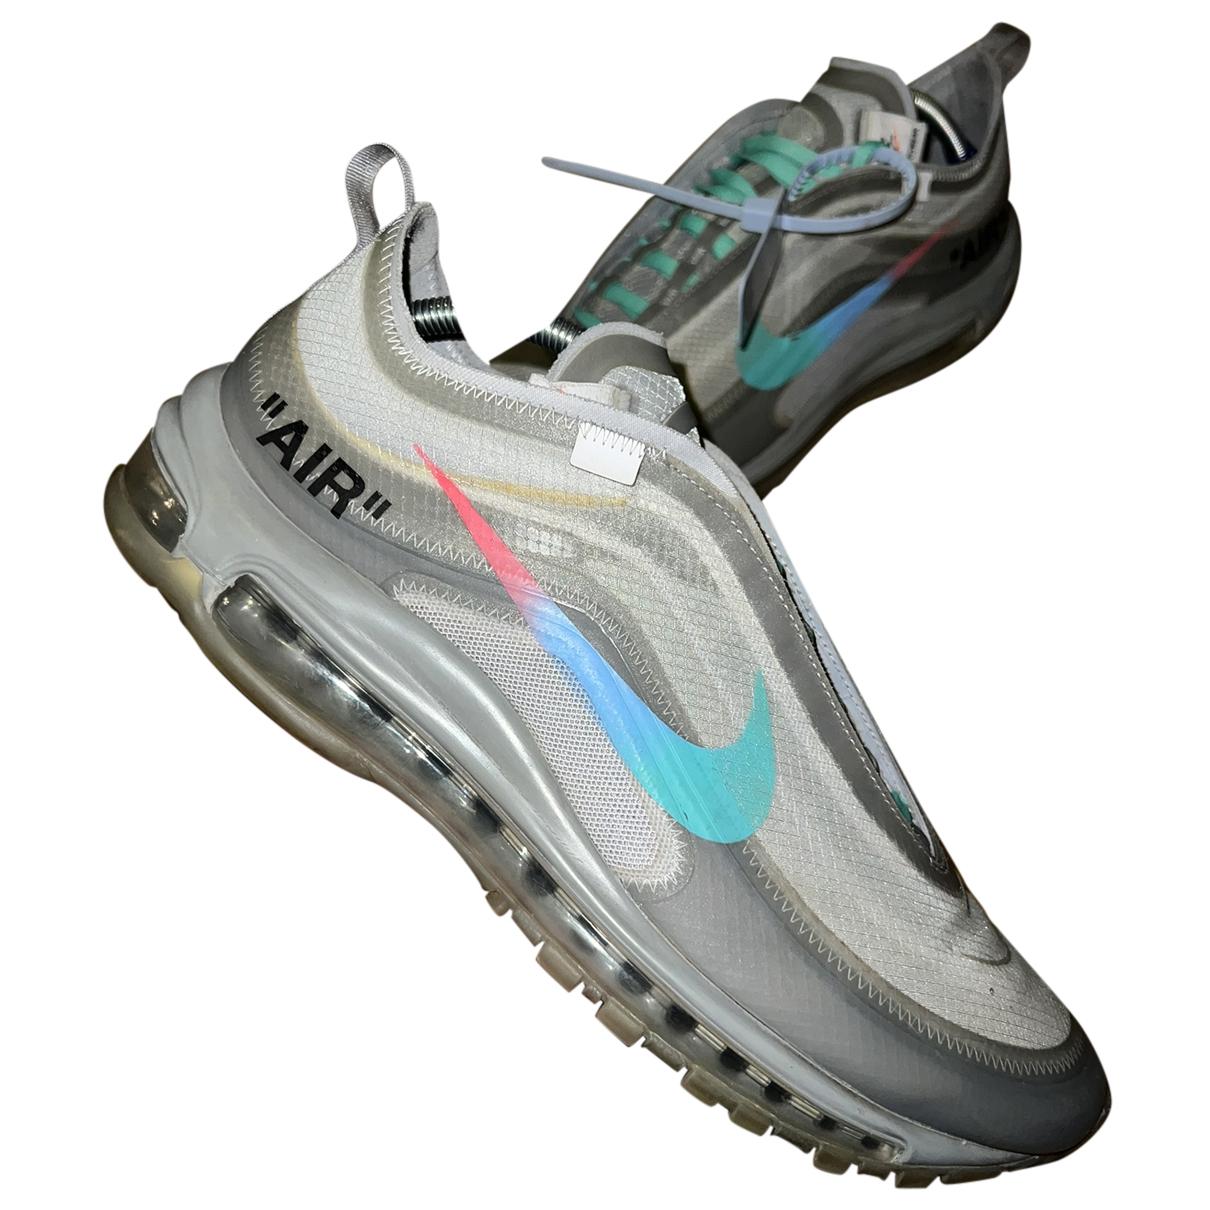 Air max 97 Nike x Off-White Shoes - Vestiaire Collective